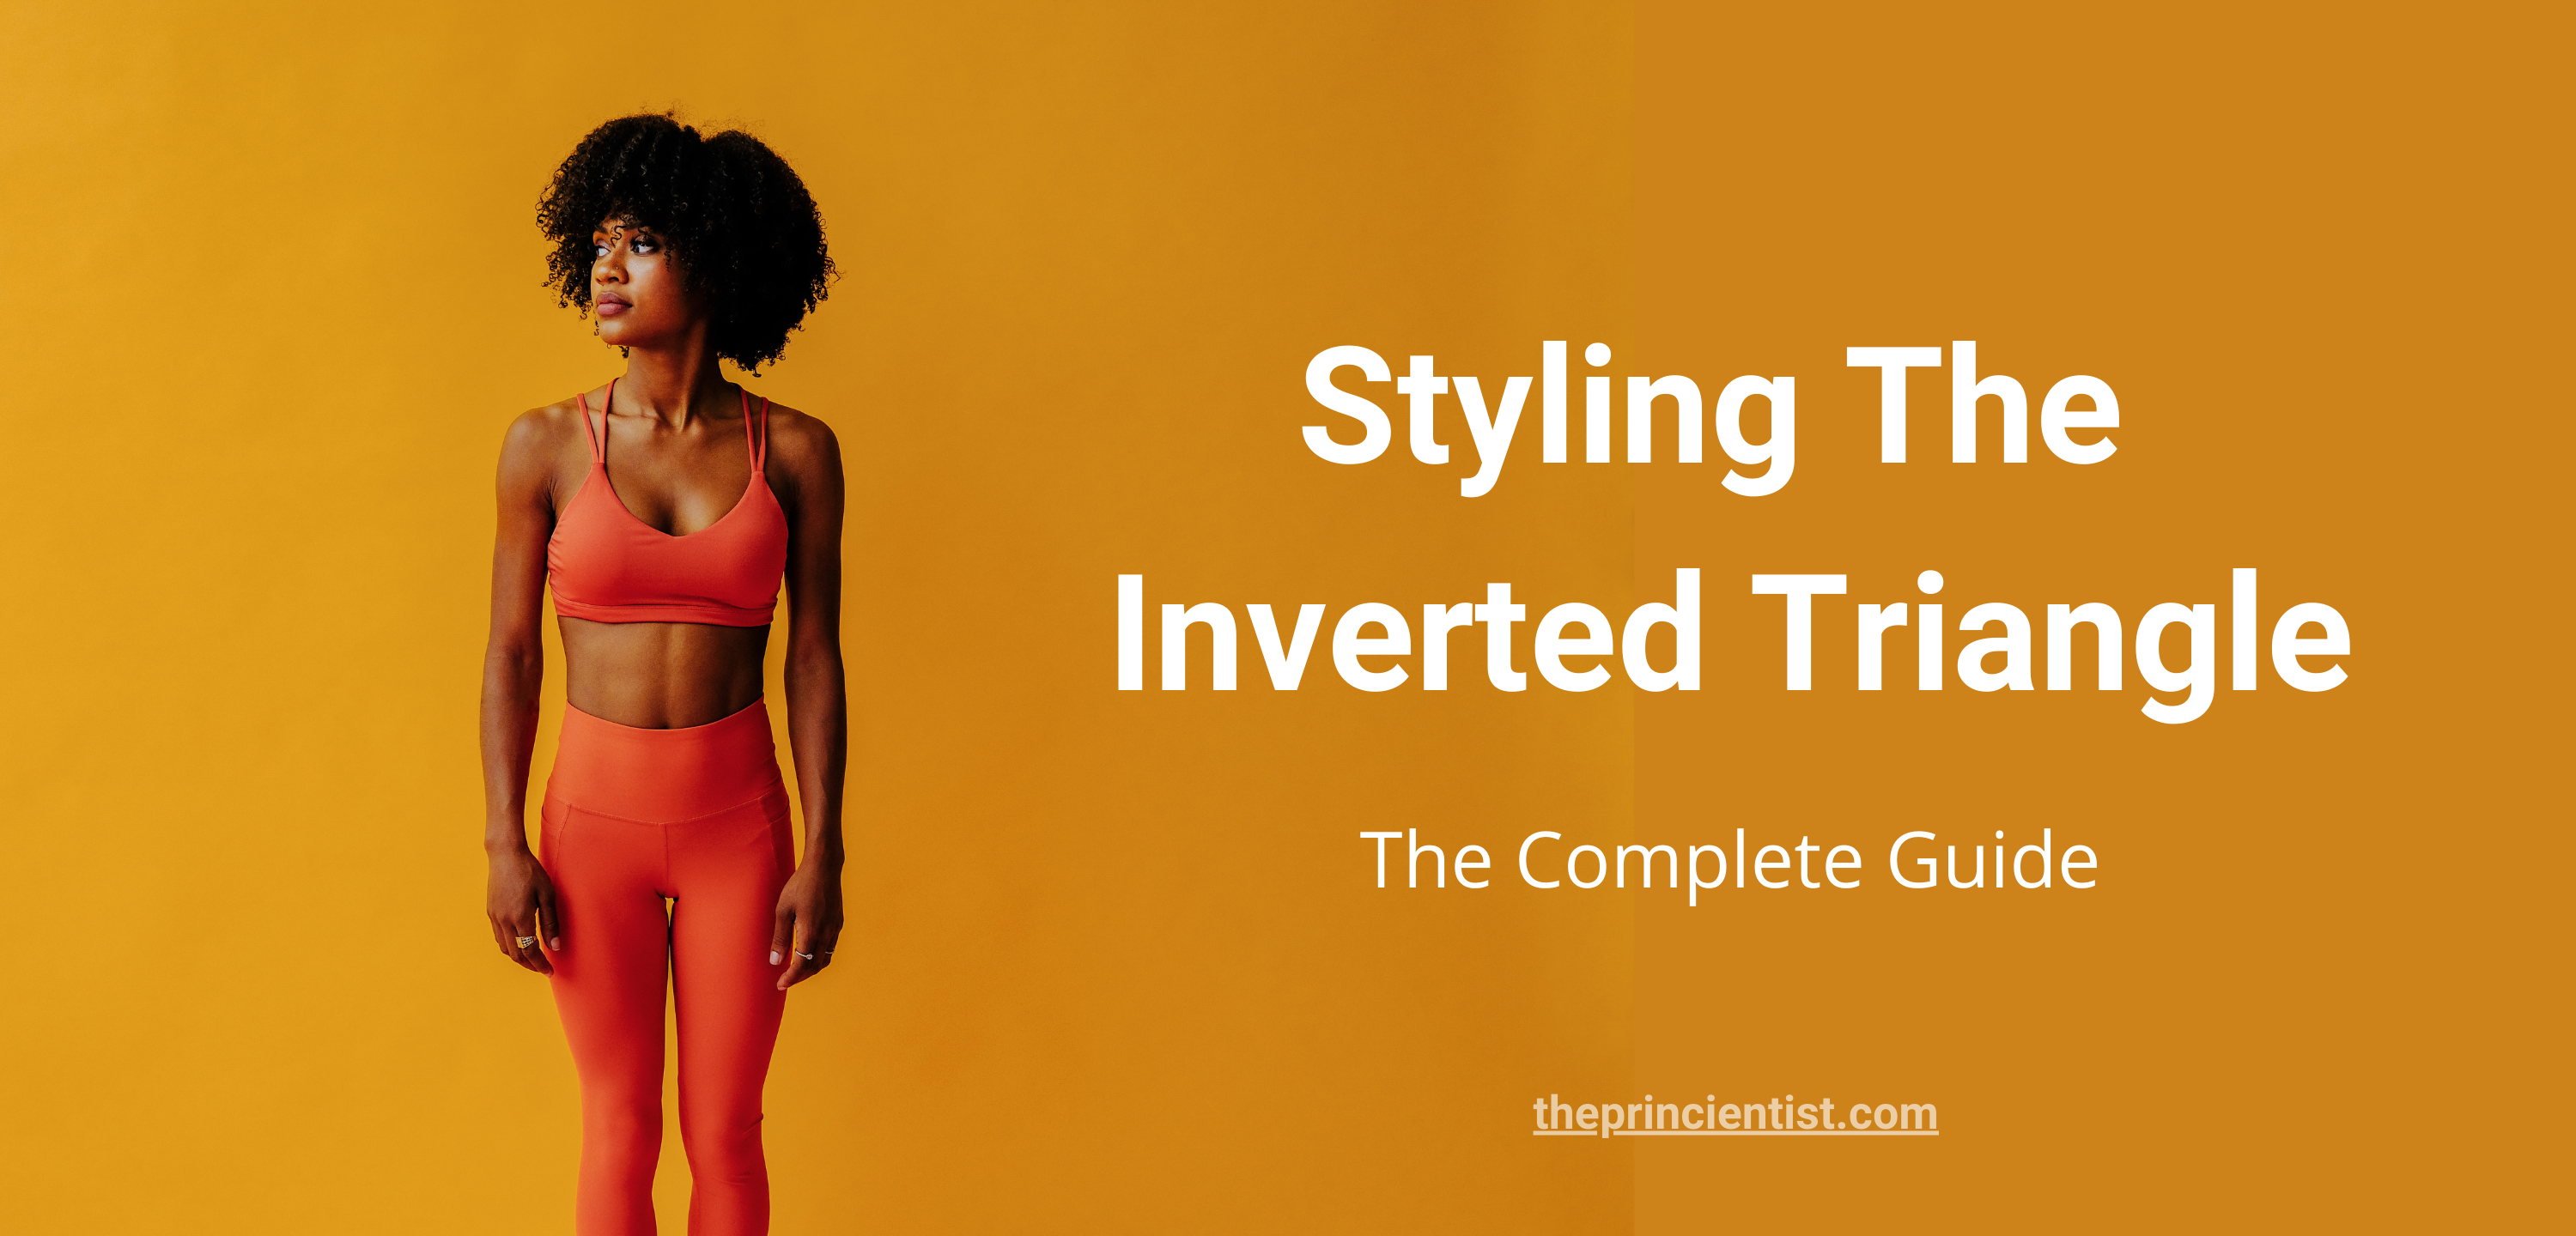 The Complete Jeans Guide for Inverted Triangle Body Shape - Petite